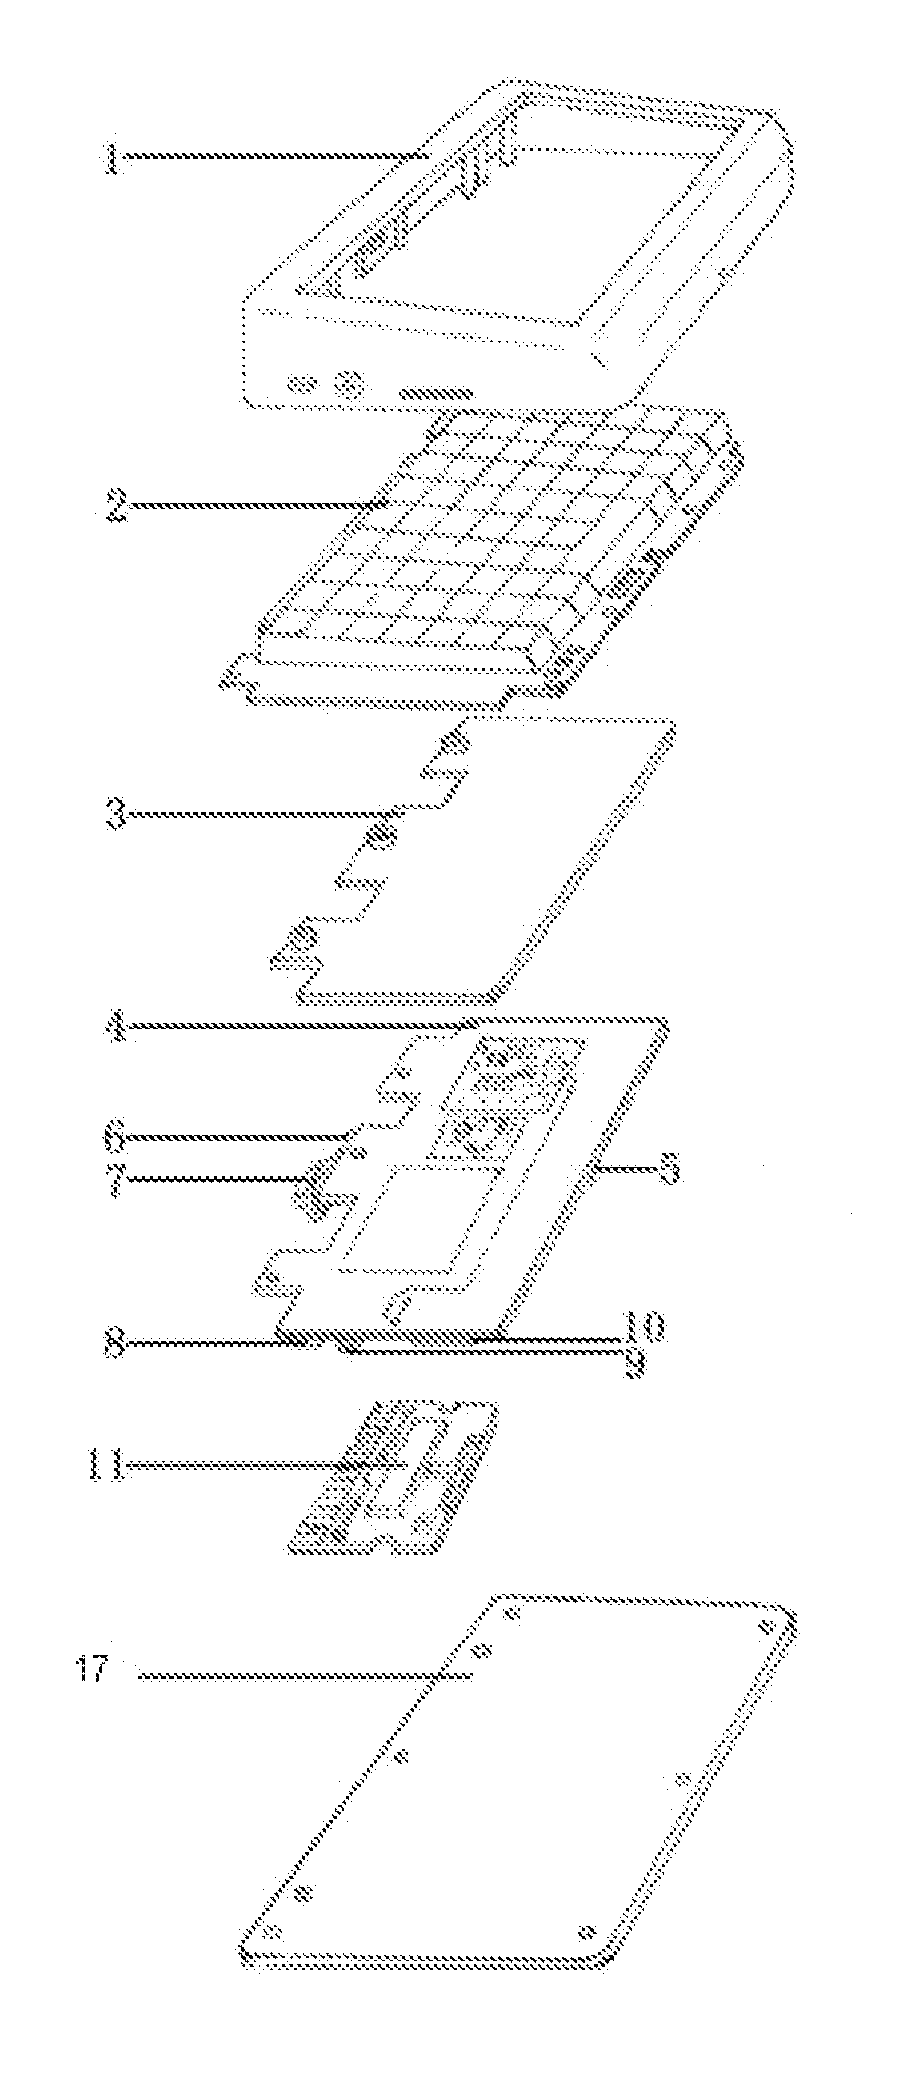 Keyboard apparatus having operation system and computer assembly